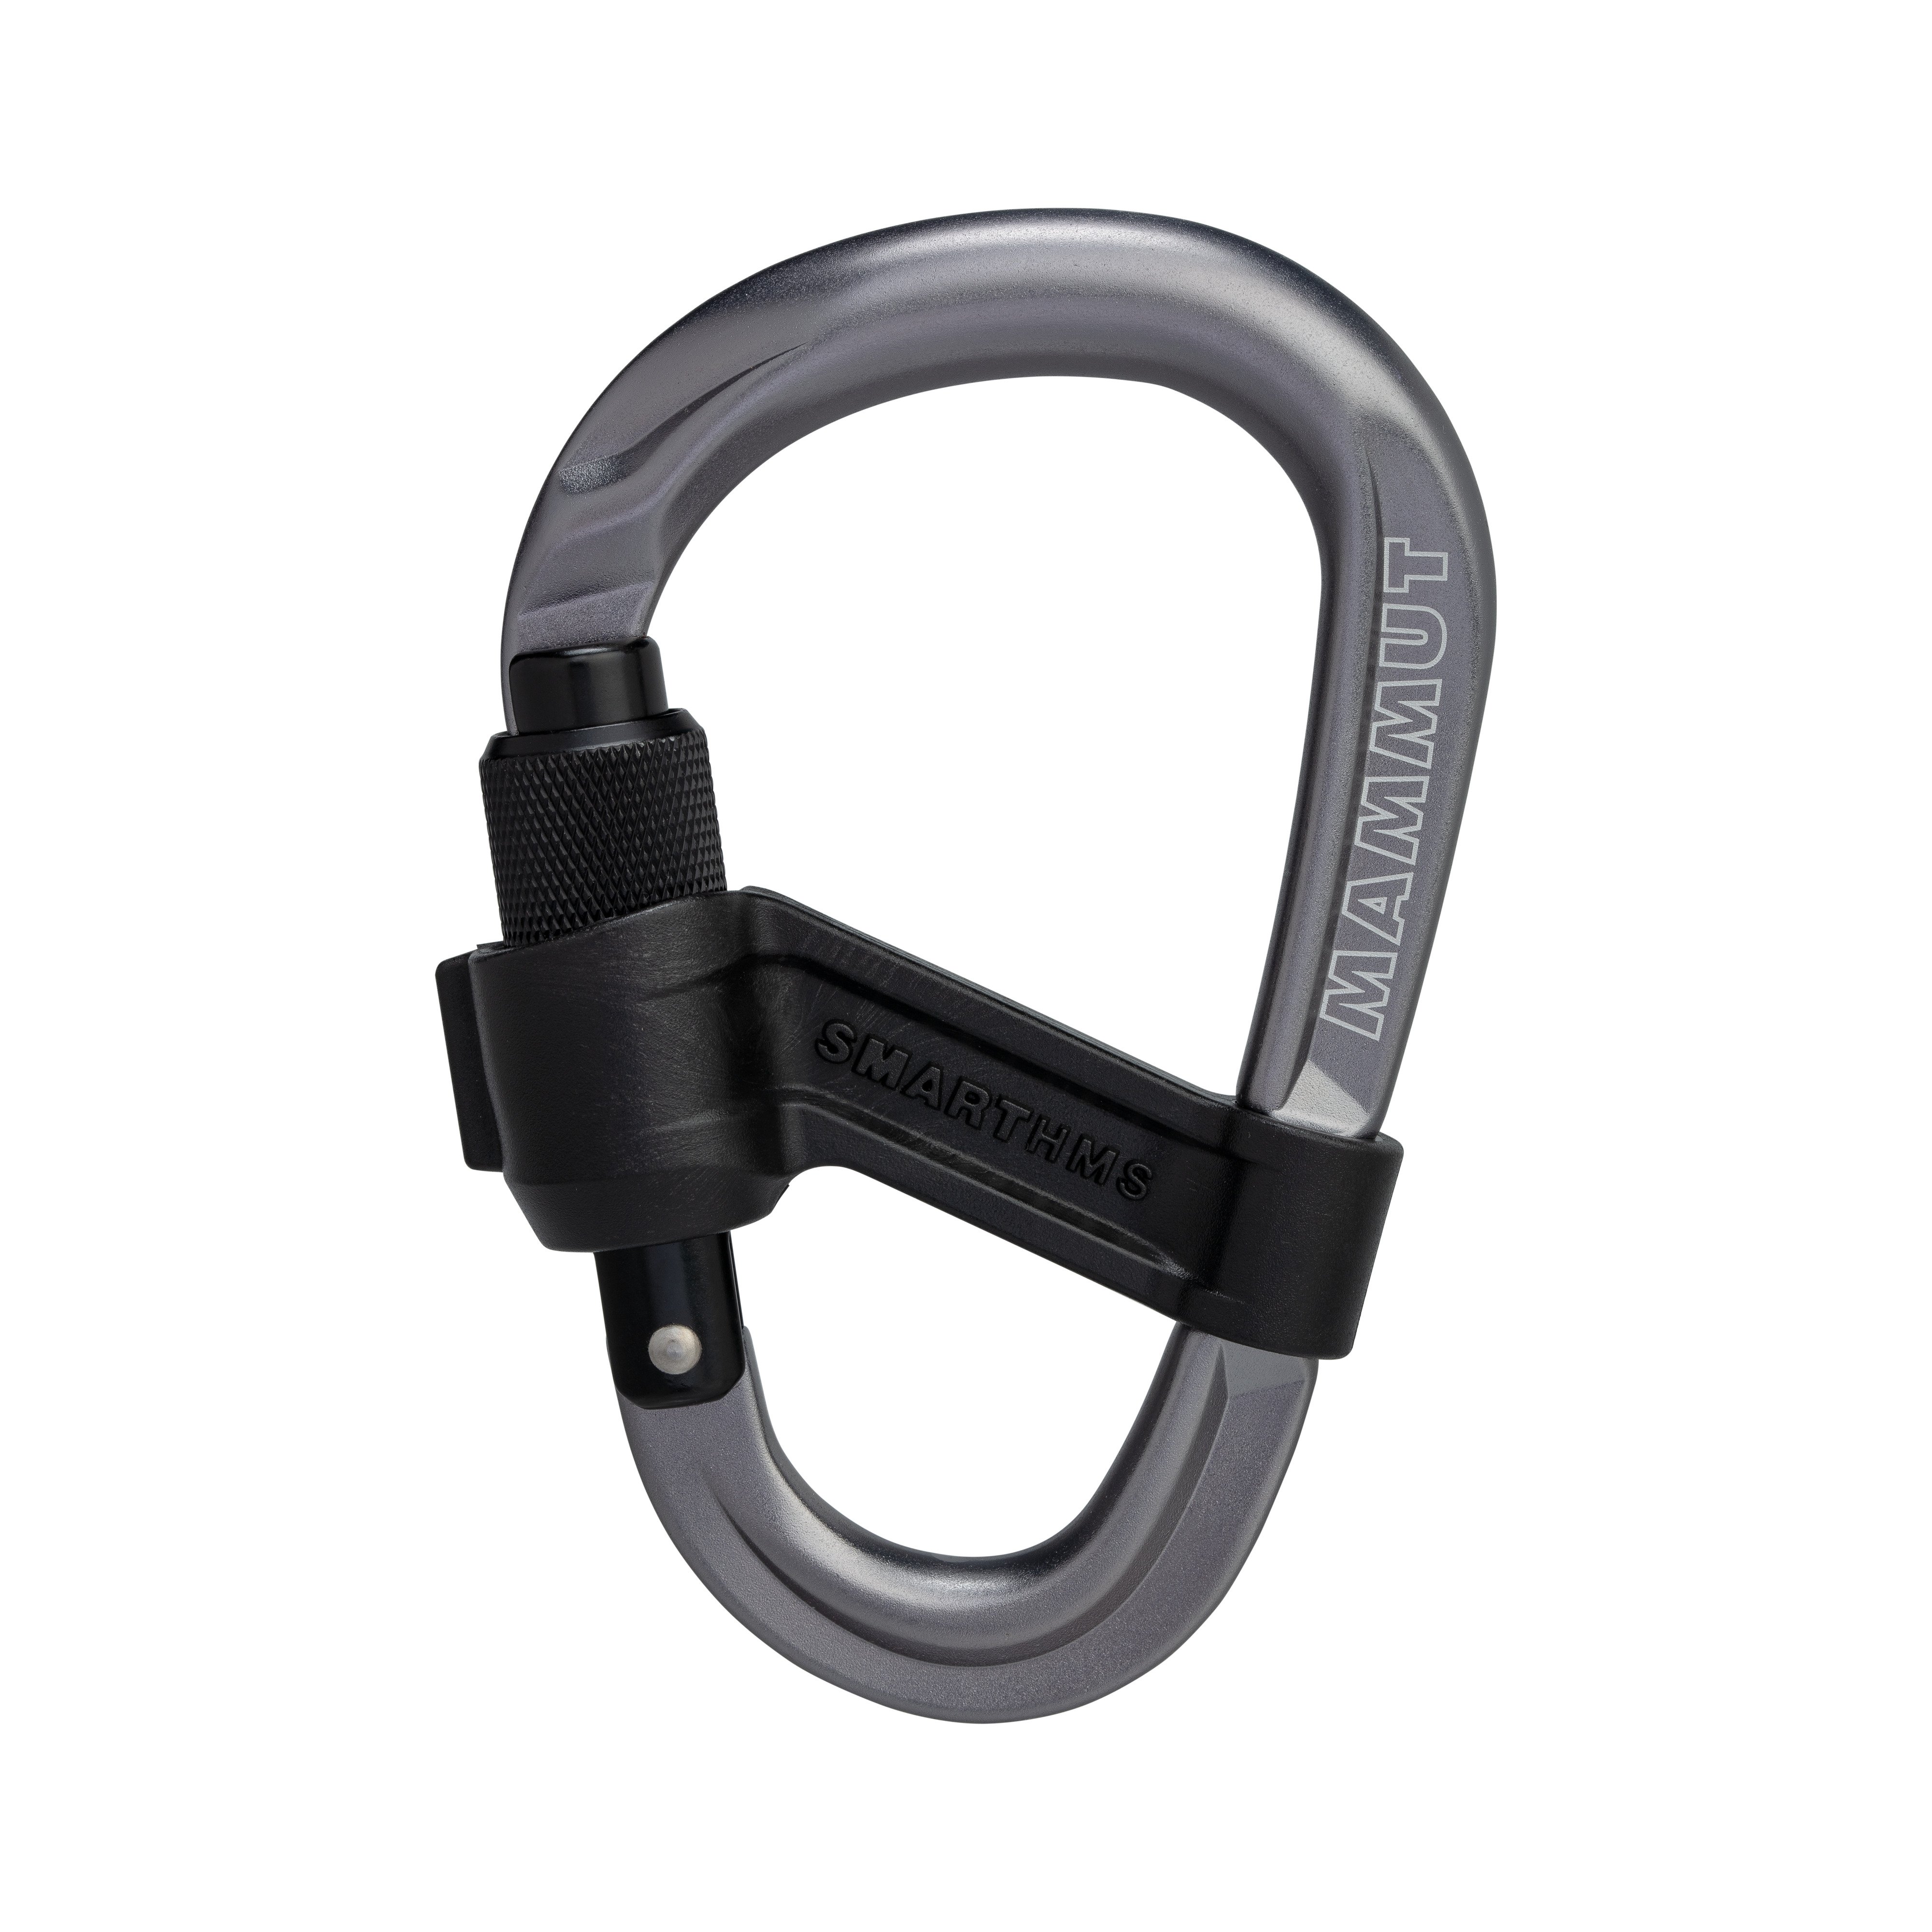 Smart HMS 2.0 Screwgate Carabiner - grey, one size product image